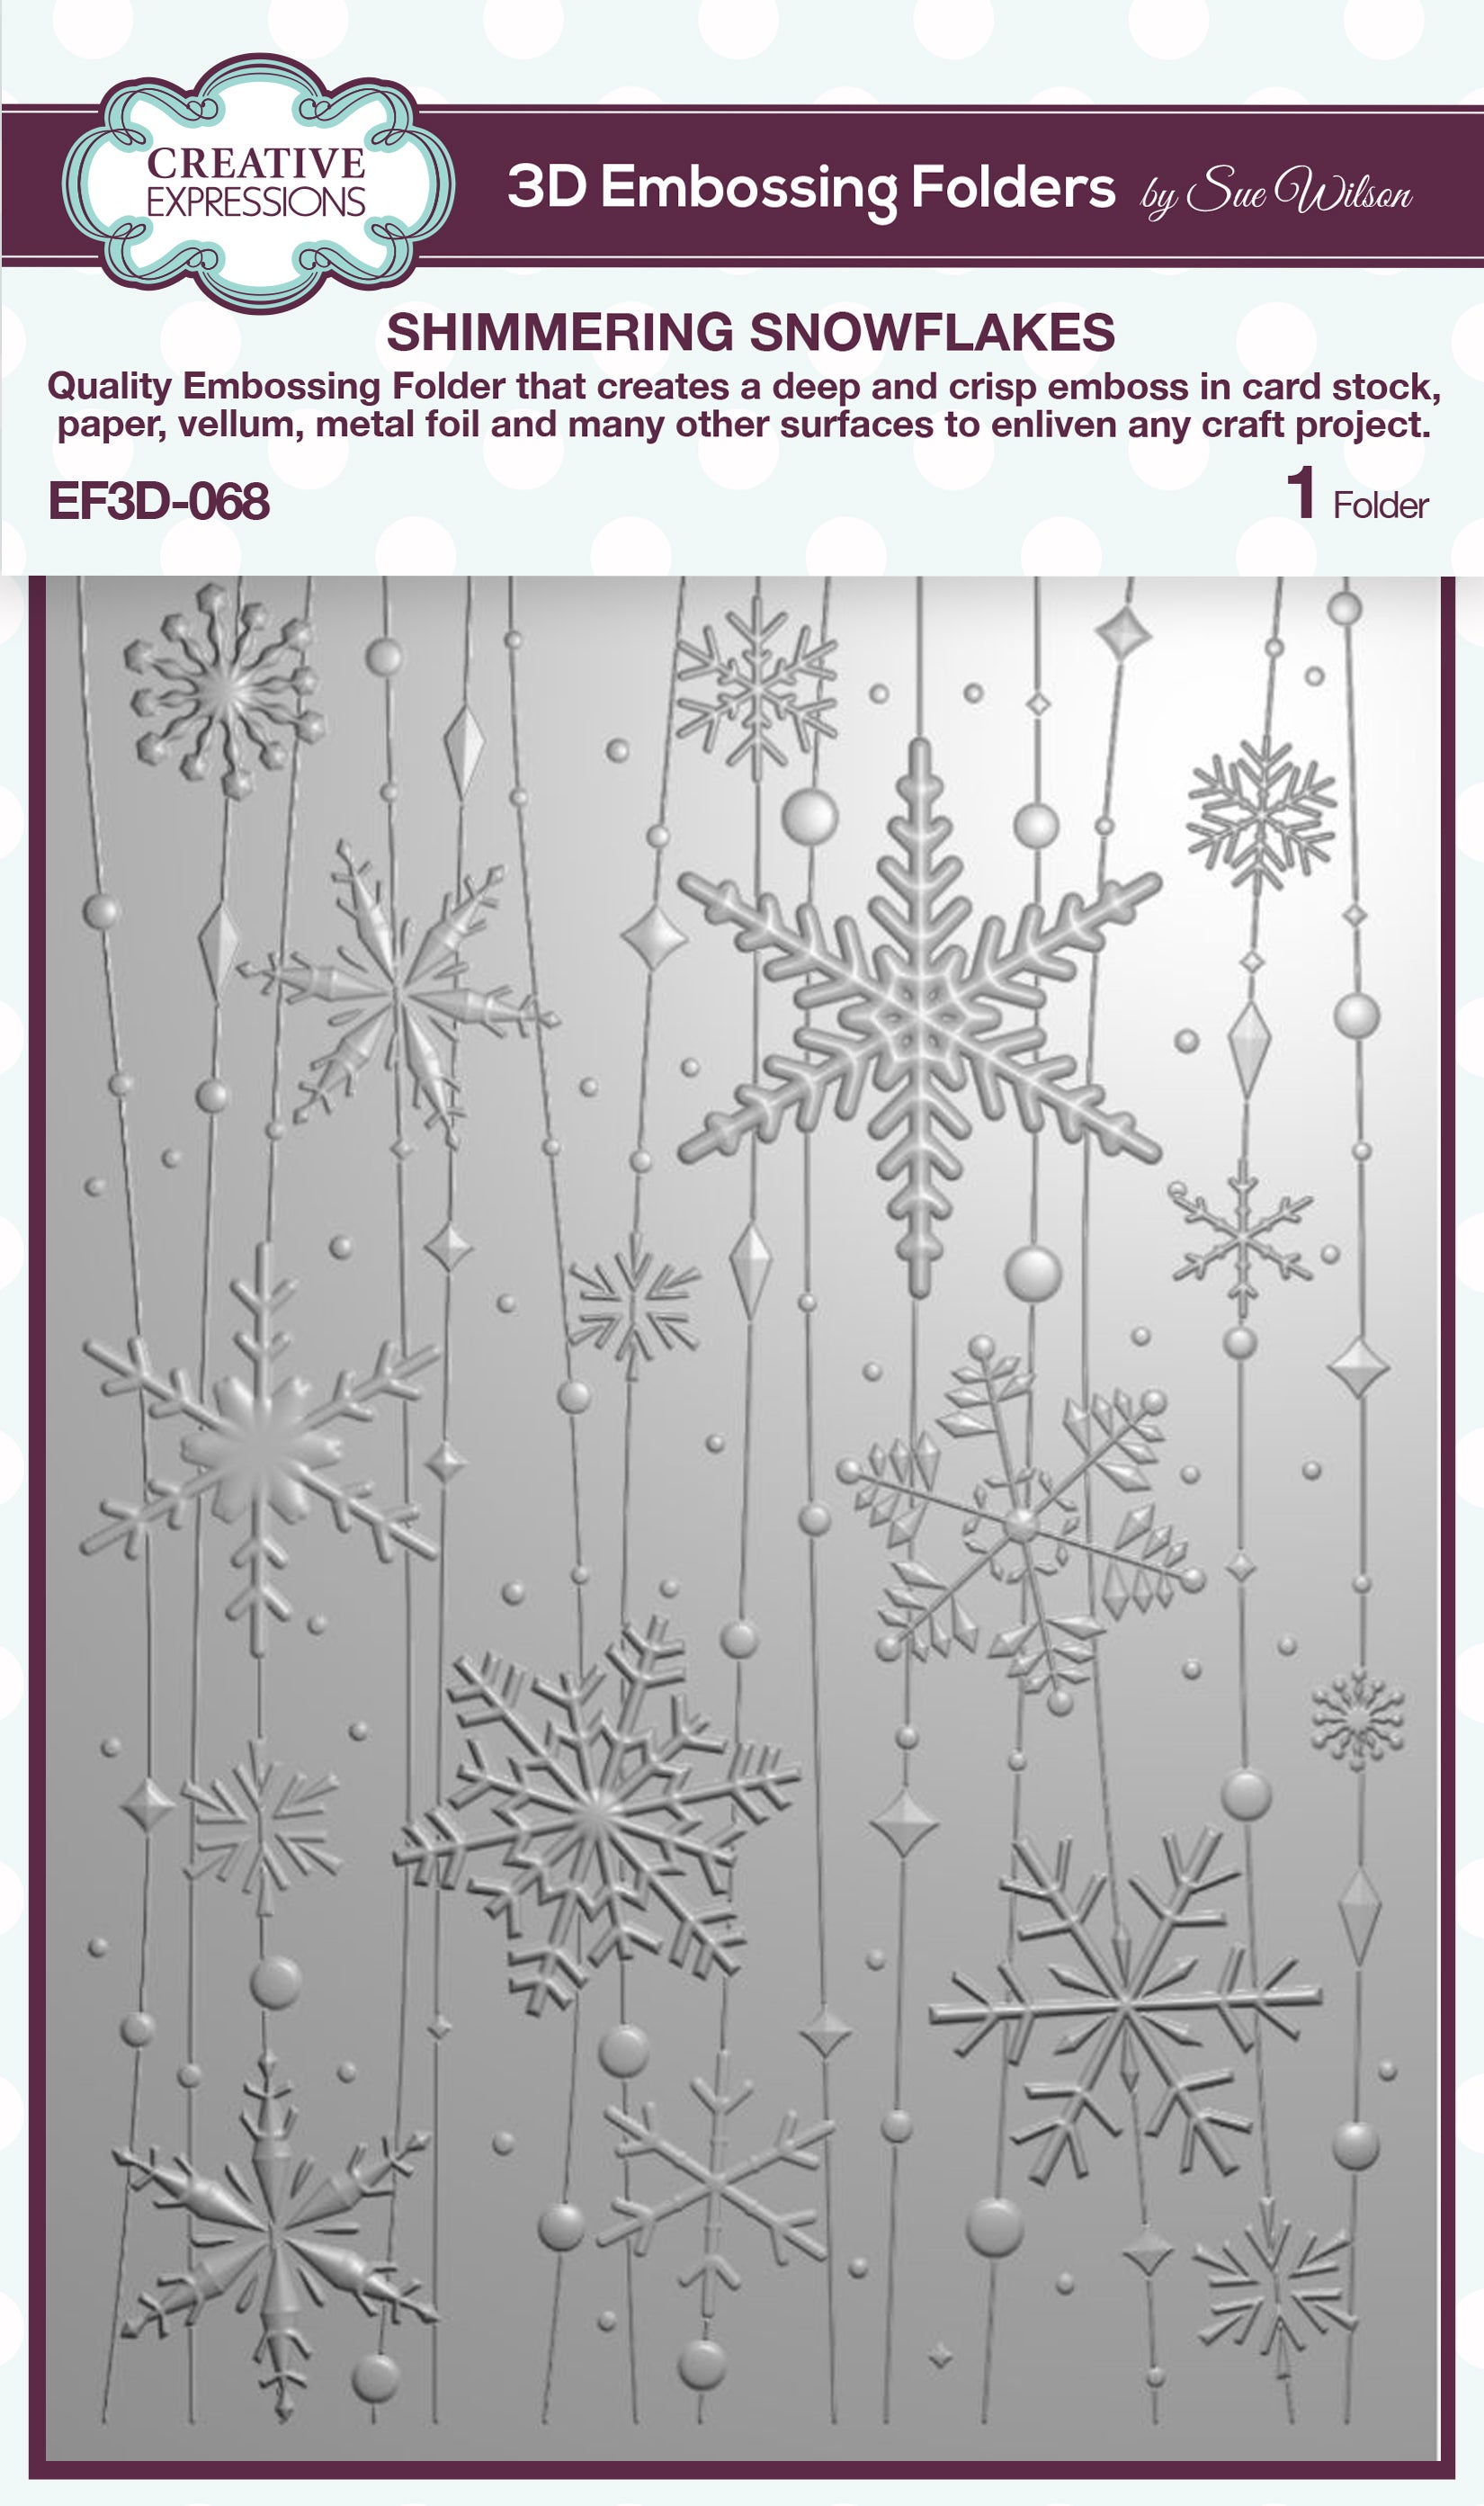 Creative Expressions Shimmering Snowflakes 5 in x 7 in 3D Embossing Folder